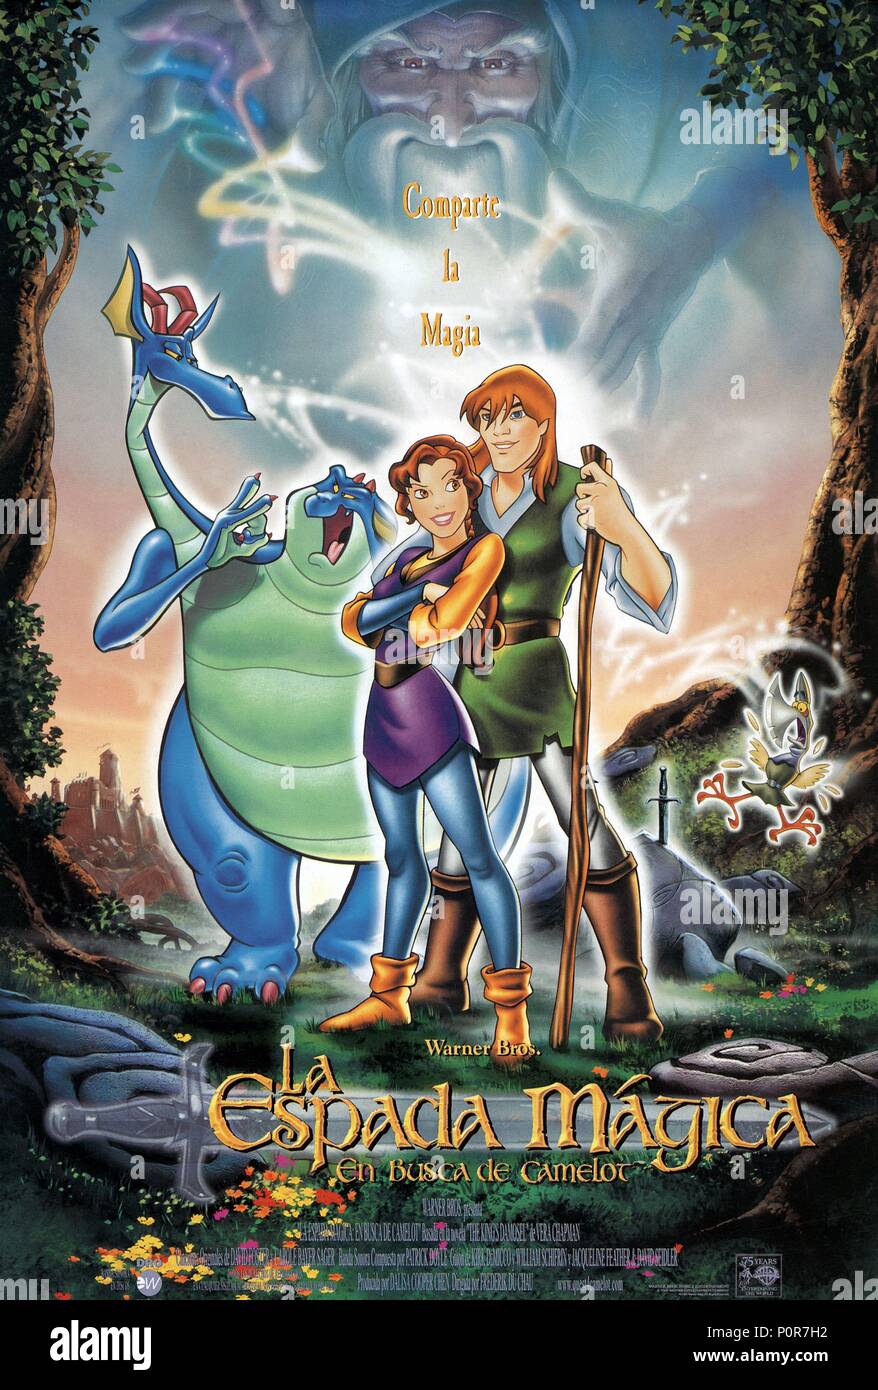 Quest for Camelot - Wikipedia